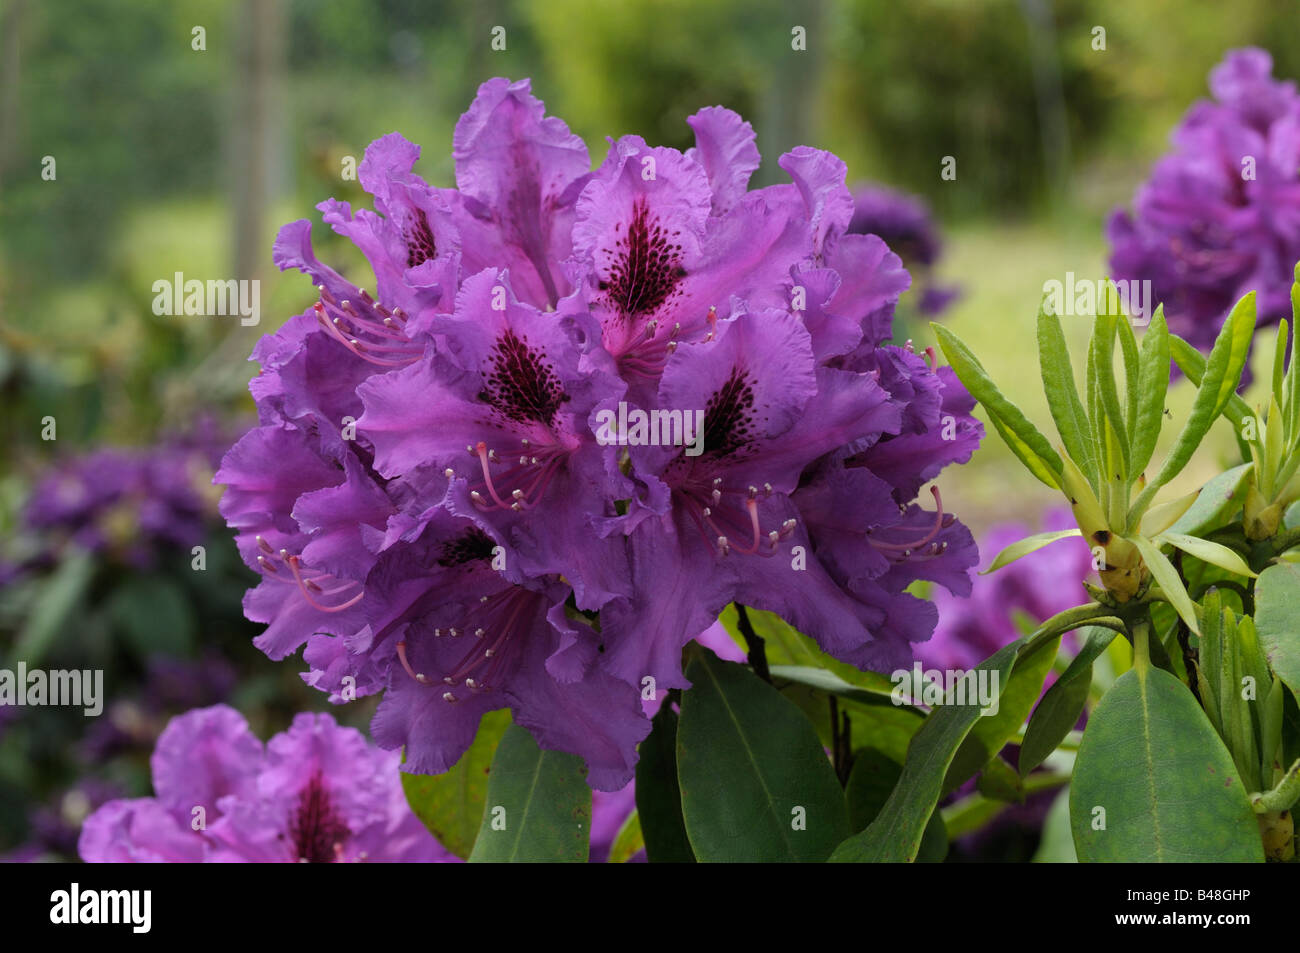 Rhododendron (Rhododendron hybrid variety Azurro) flowers Stock Photo